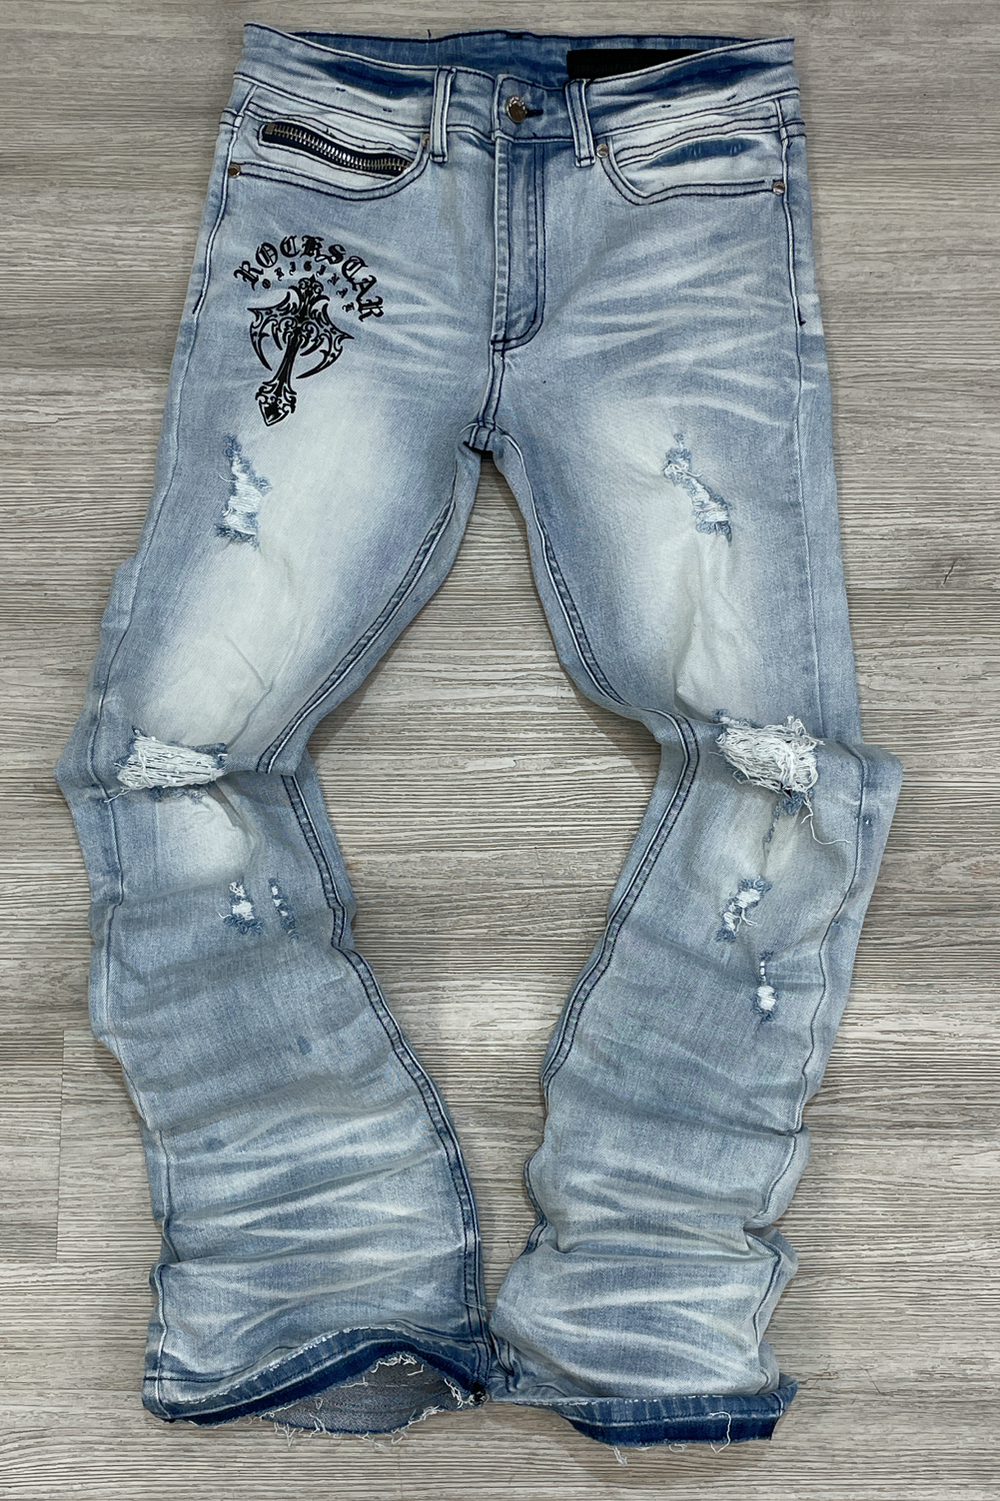 Rockstar - taime stacked flare jeans